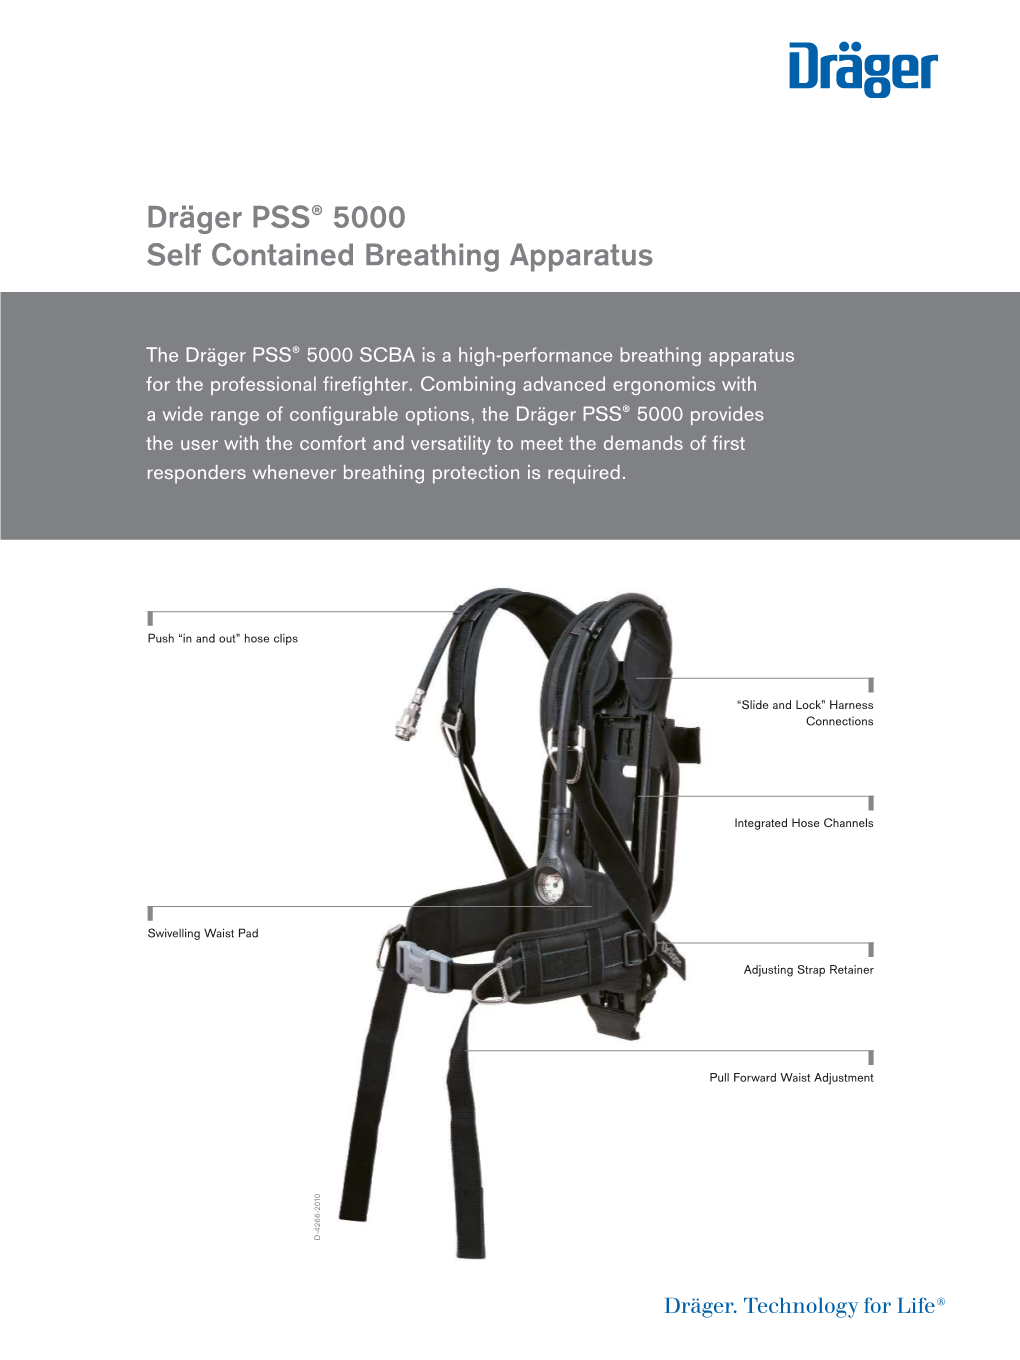 Dräger PSS® 5000 Self Contained Breathing Apparatus